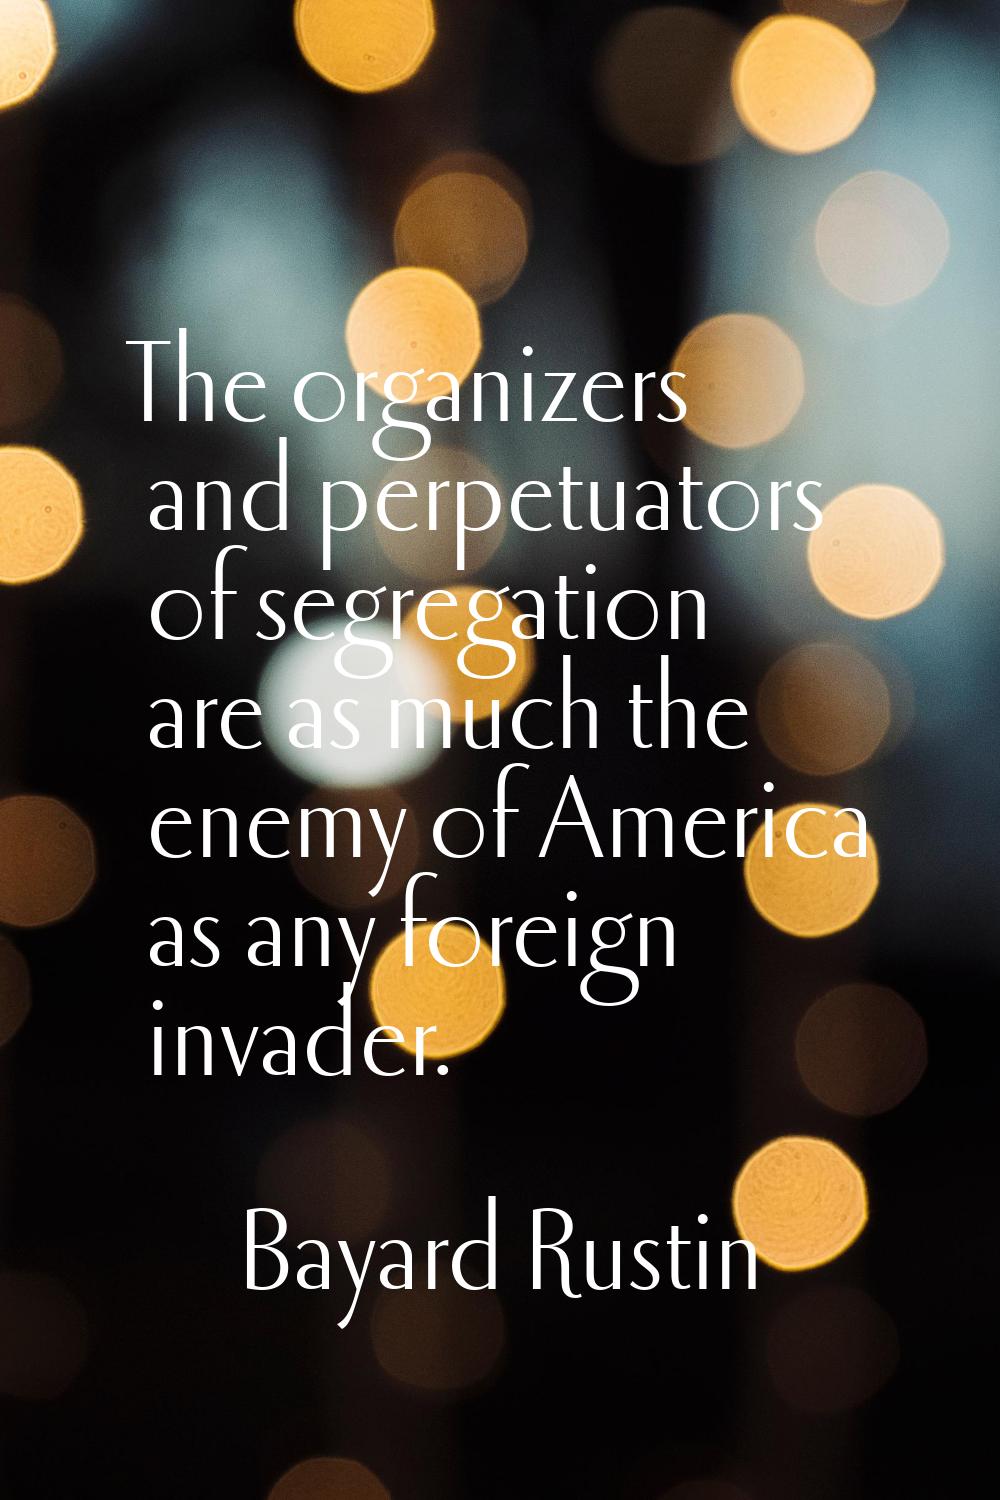 The organizers and perpetuators of segregation are as much the enemy of America as any foreign inva